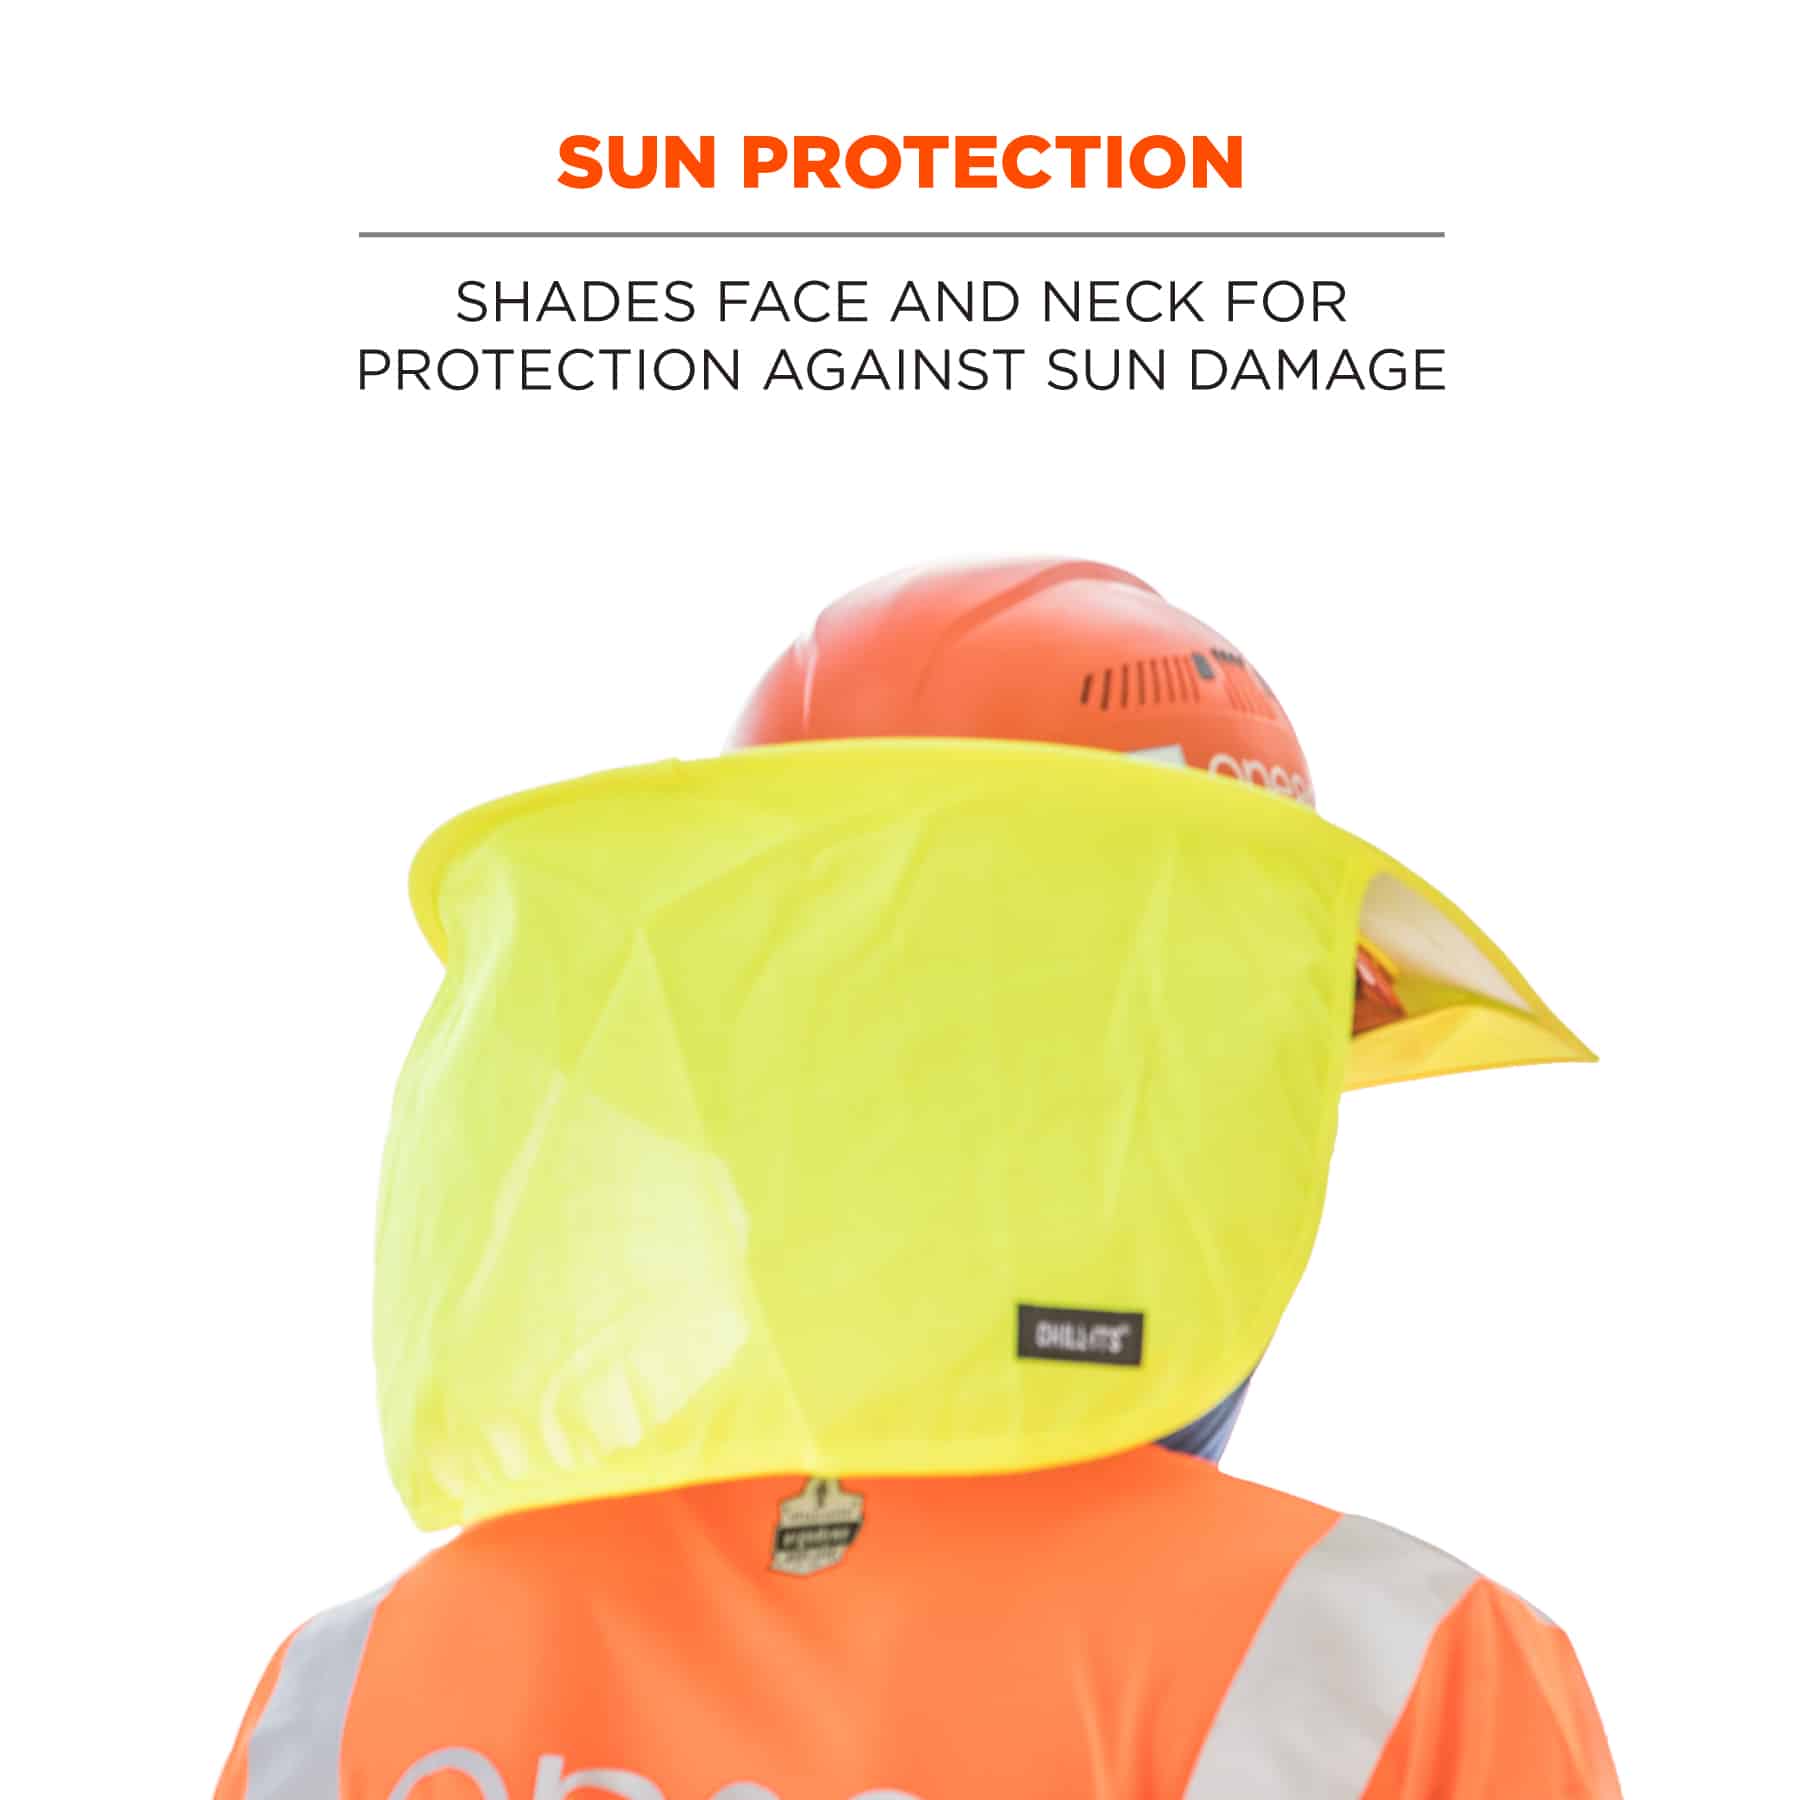 Removable Brim & Neck Shade for Hard Hats